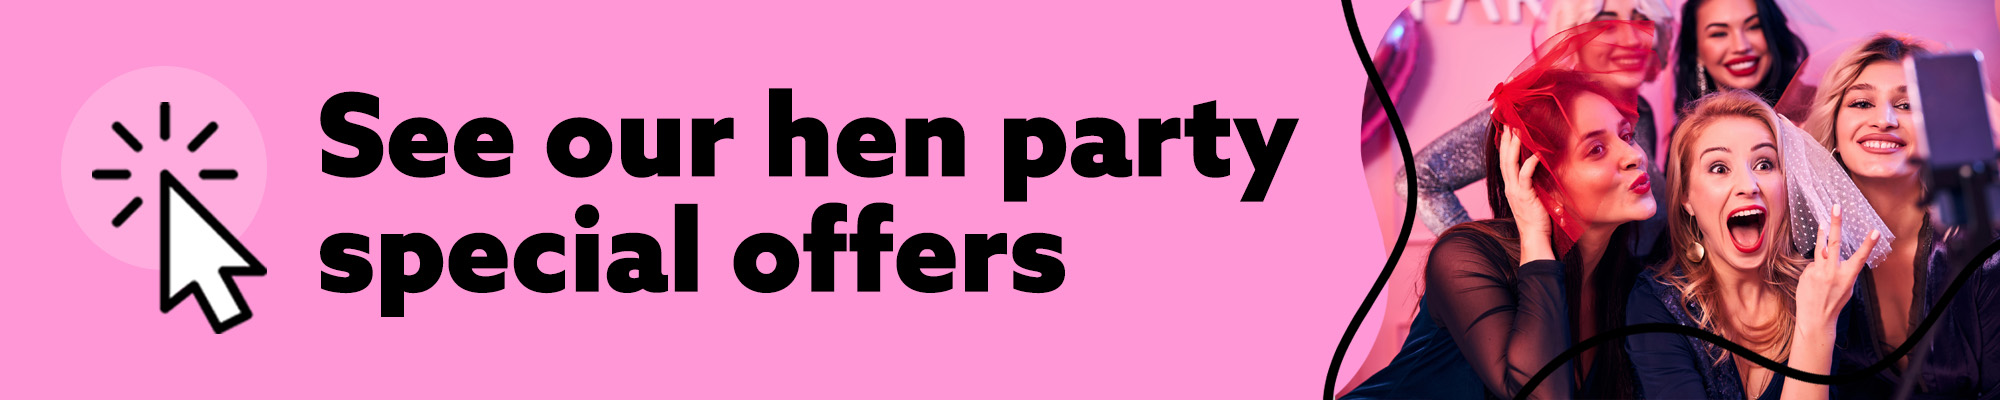 See Our Hen Party Special Offers